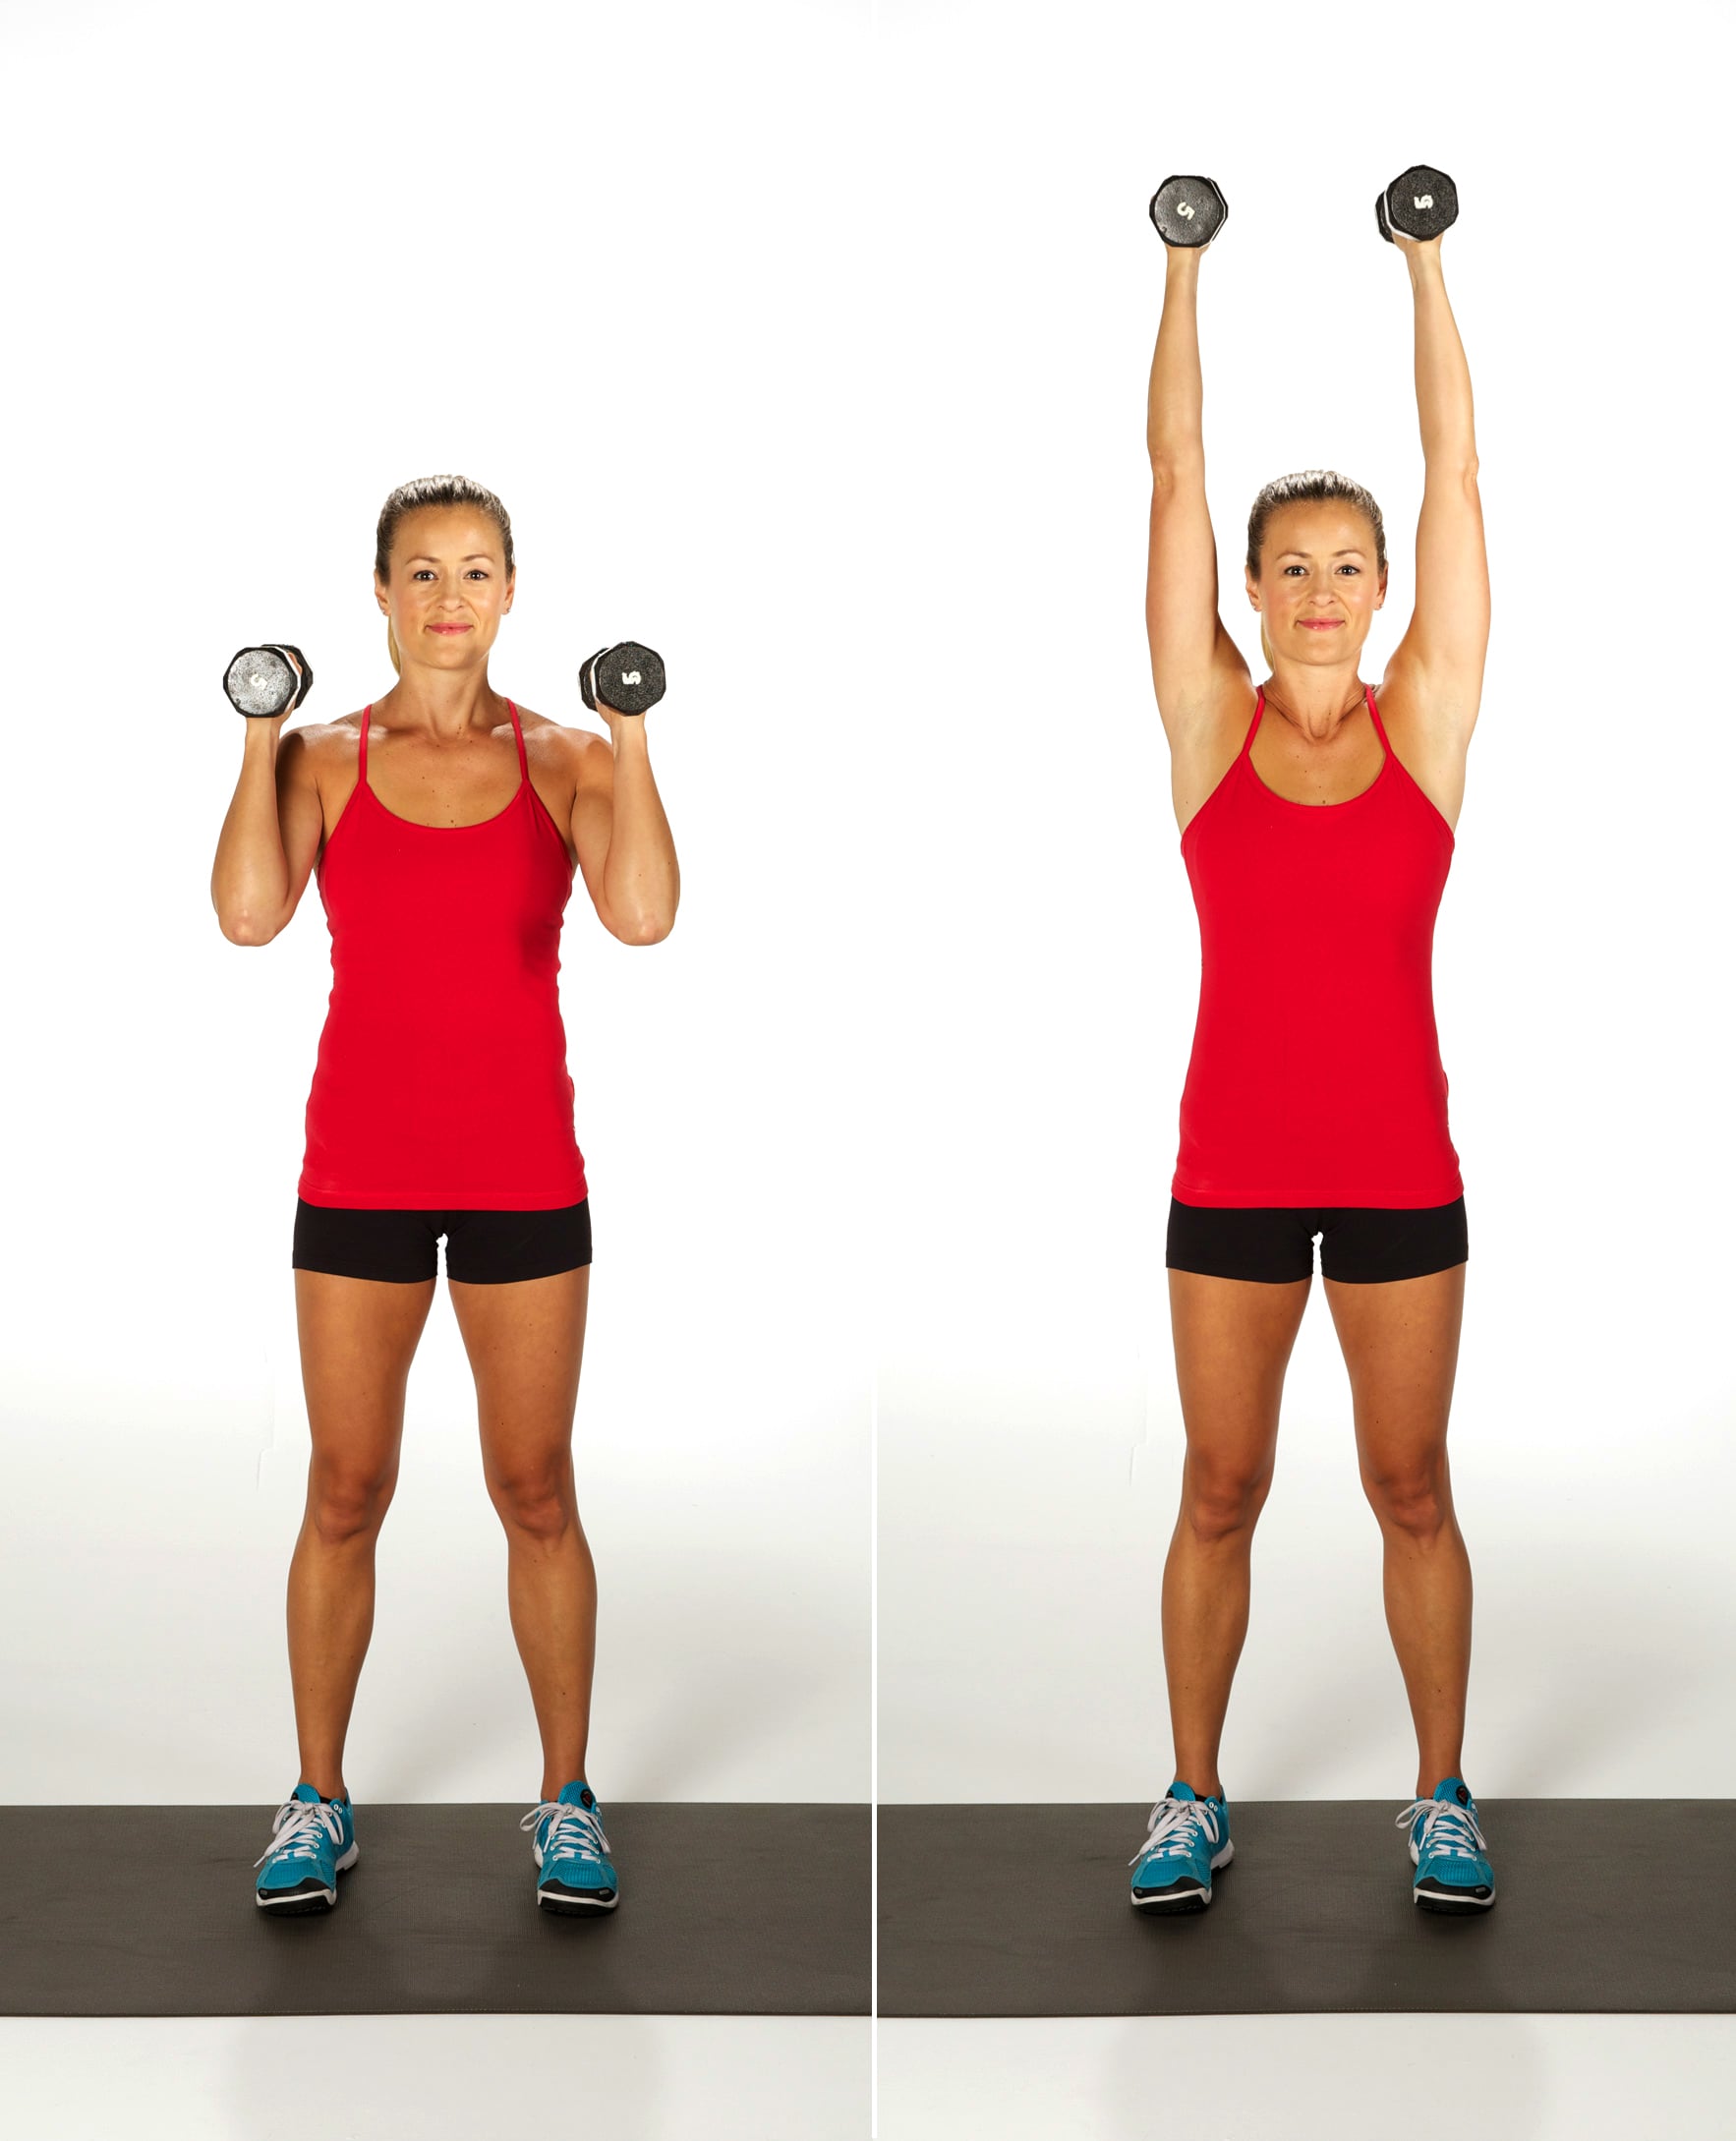 10 Minute Arm And Shoulder Workout With Dumbbell Weights! 